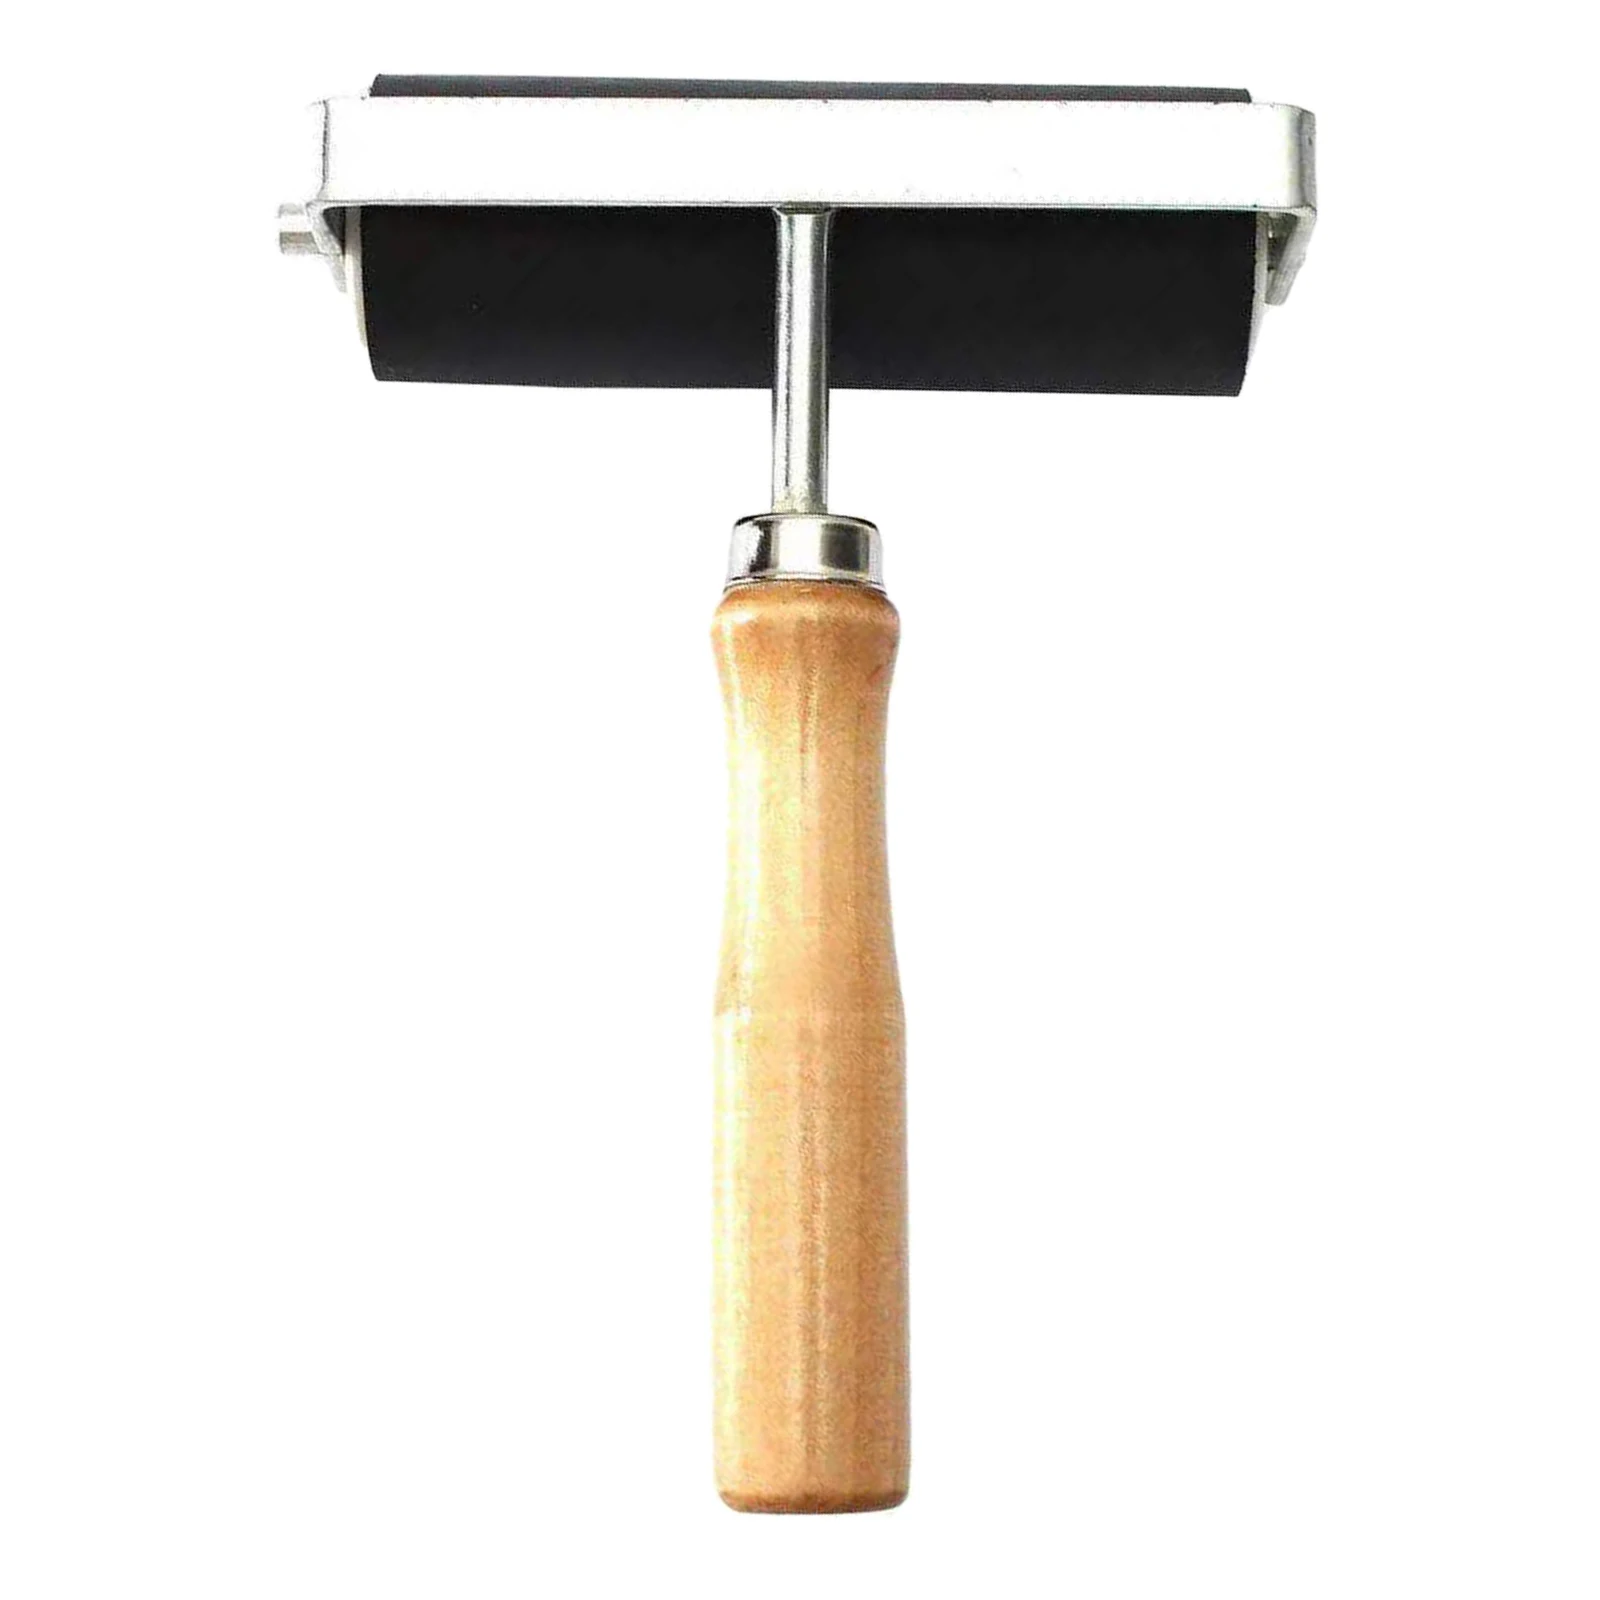 3.94inch Deluxe Rubber Roller Wood Handle Non-Slip Glue Brayer for Print Stamping Printmaking Wallpaper Arts Crafts Tool